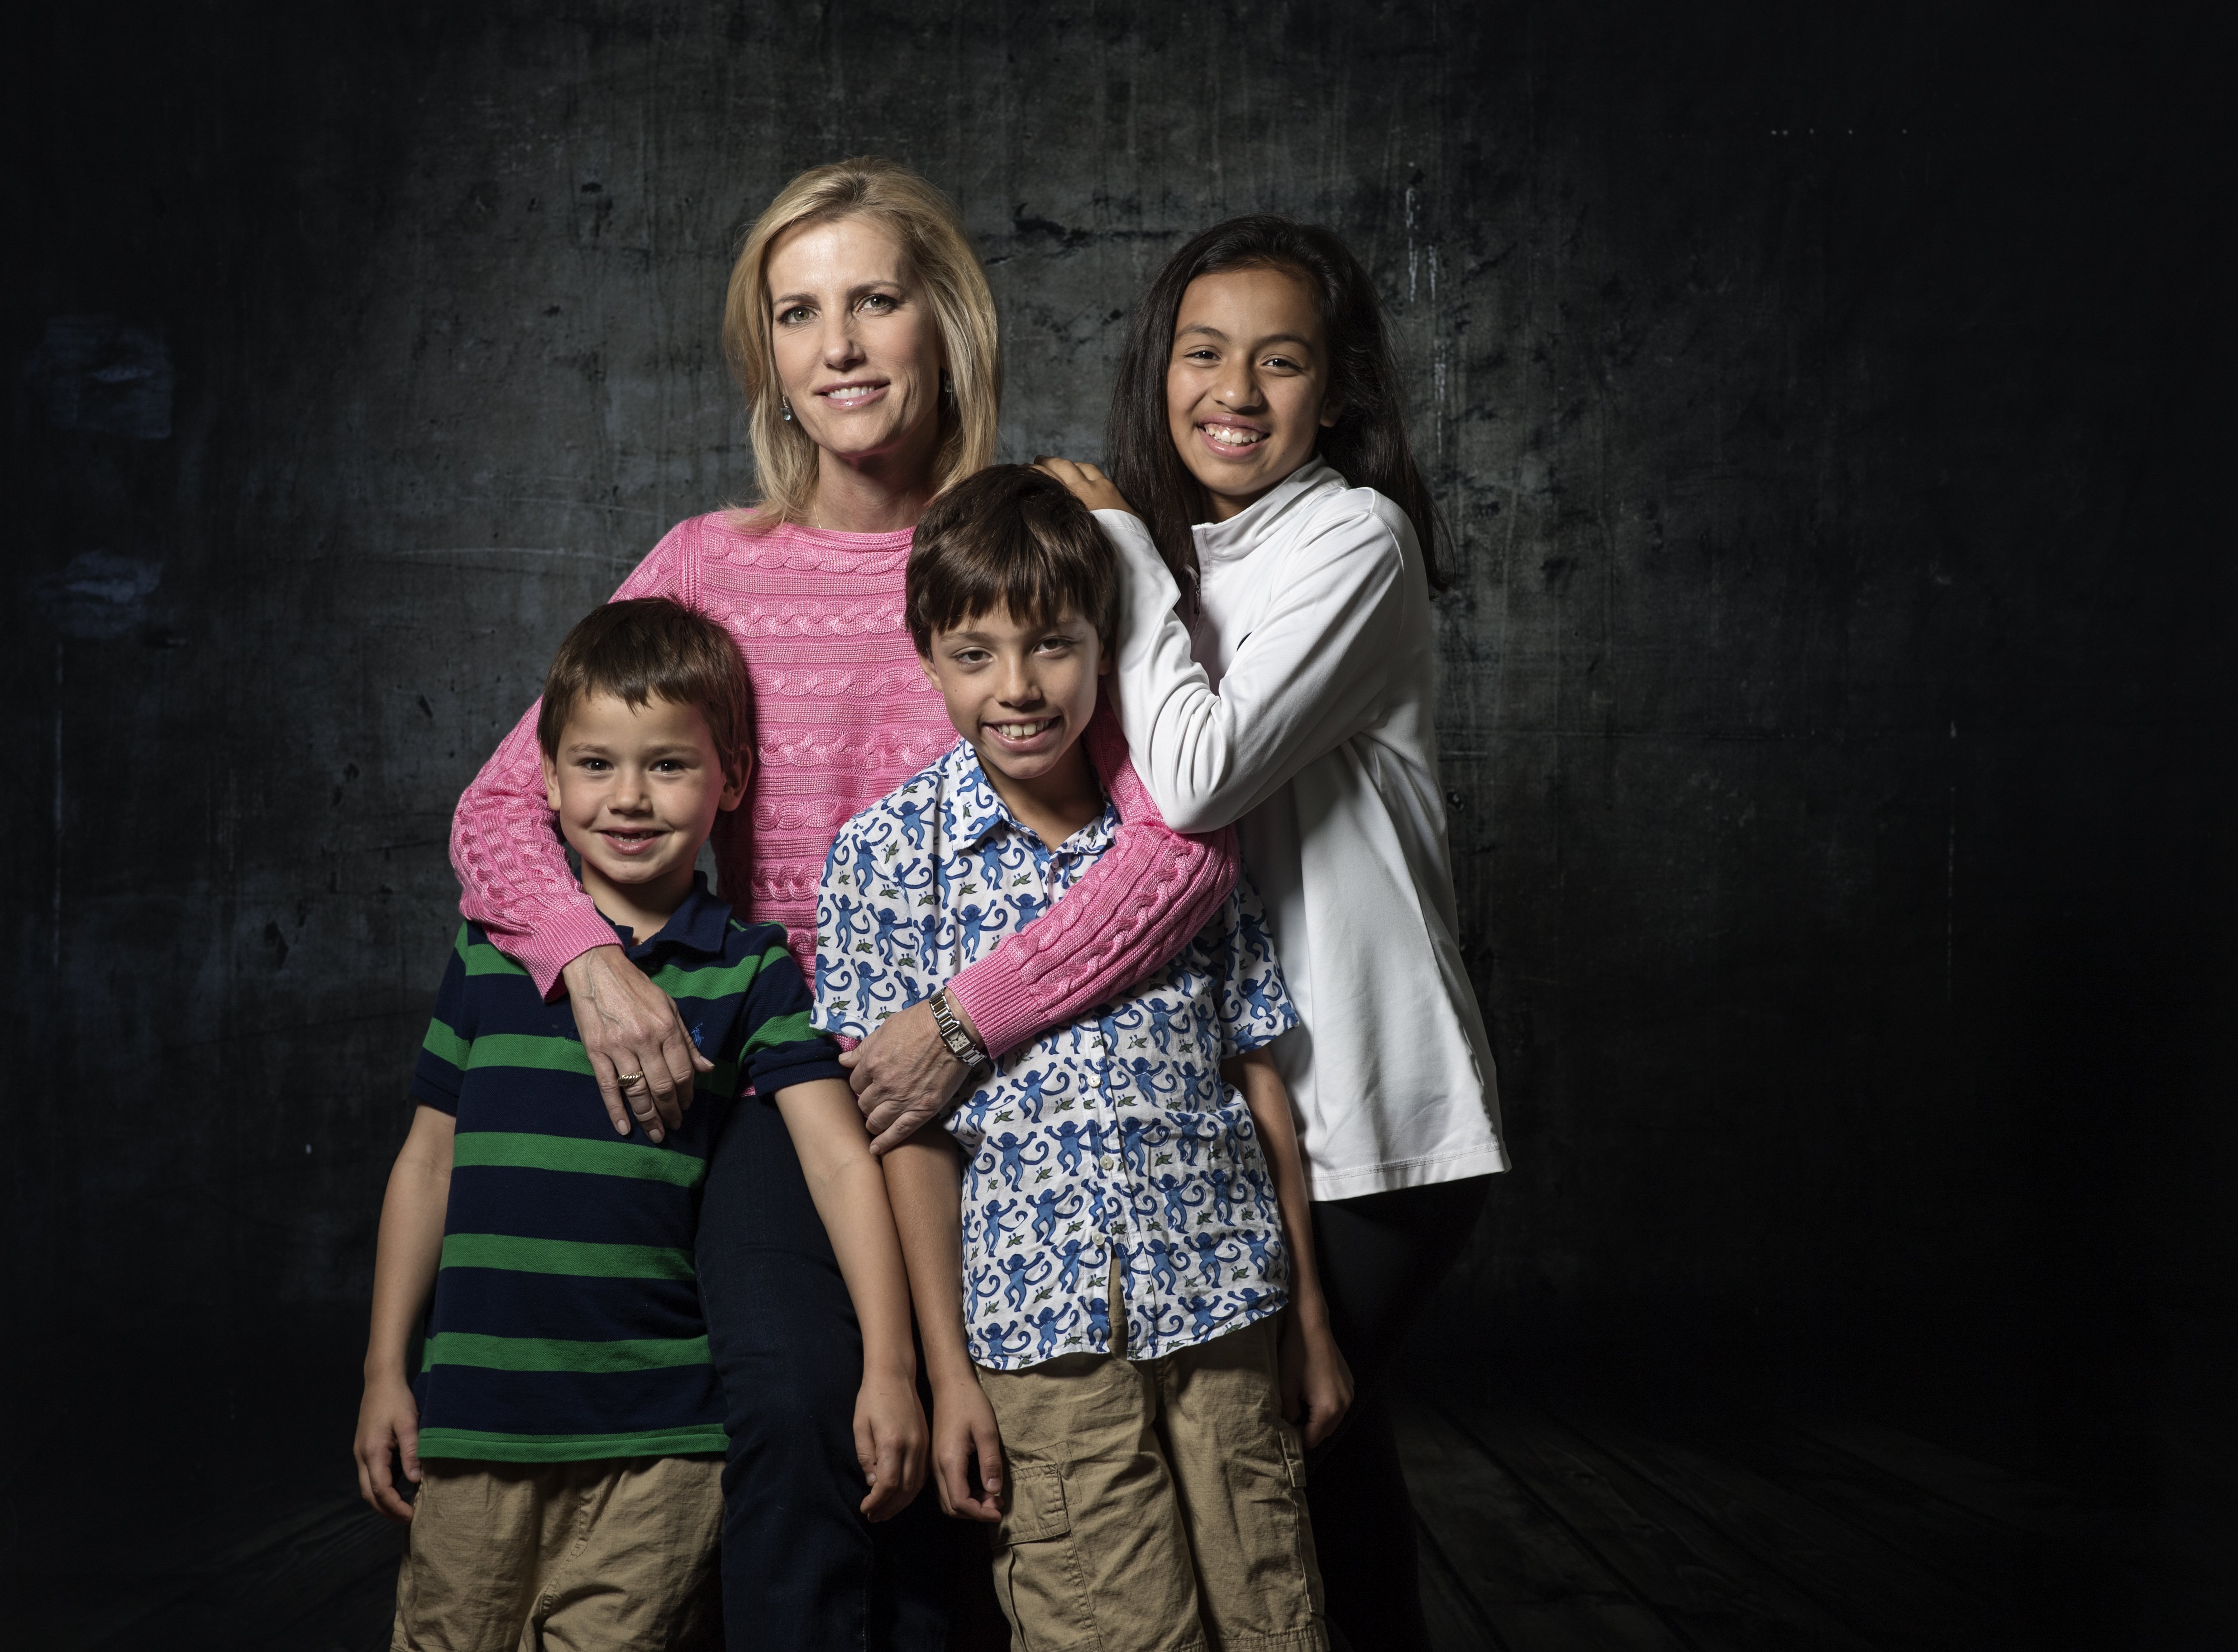 Laura Ingraham photographed with her children on on October 14, 2017. | Source: Getty Images